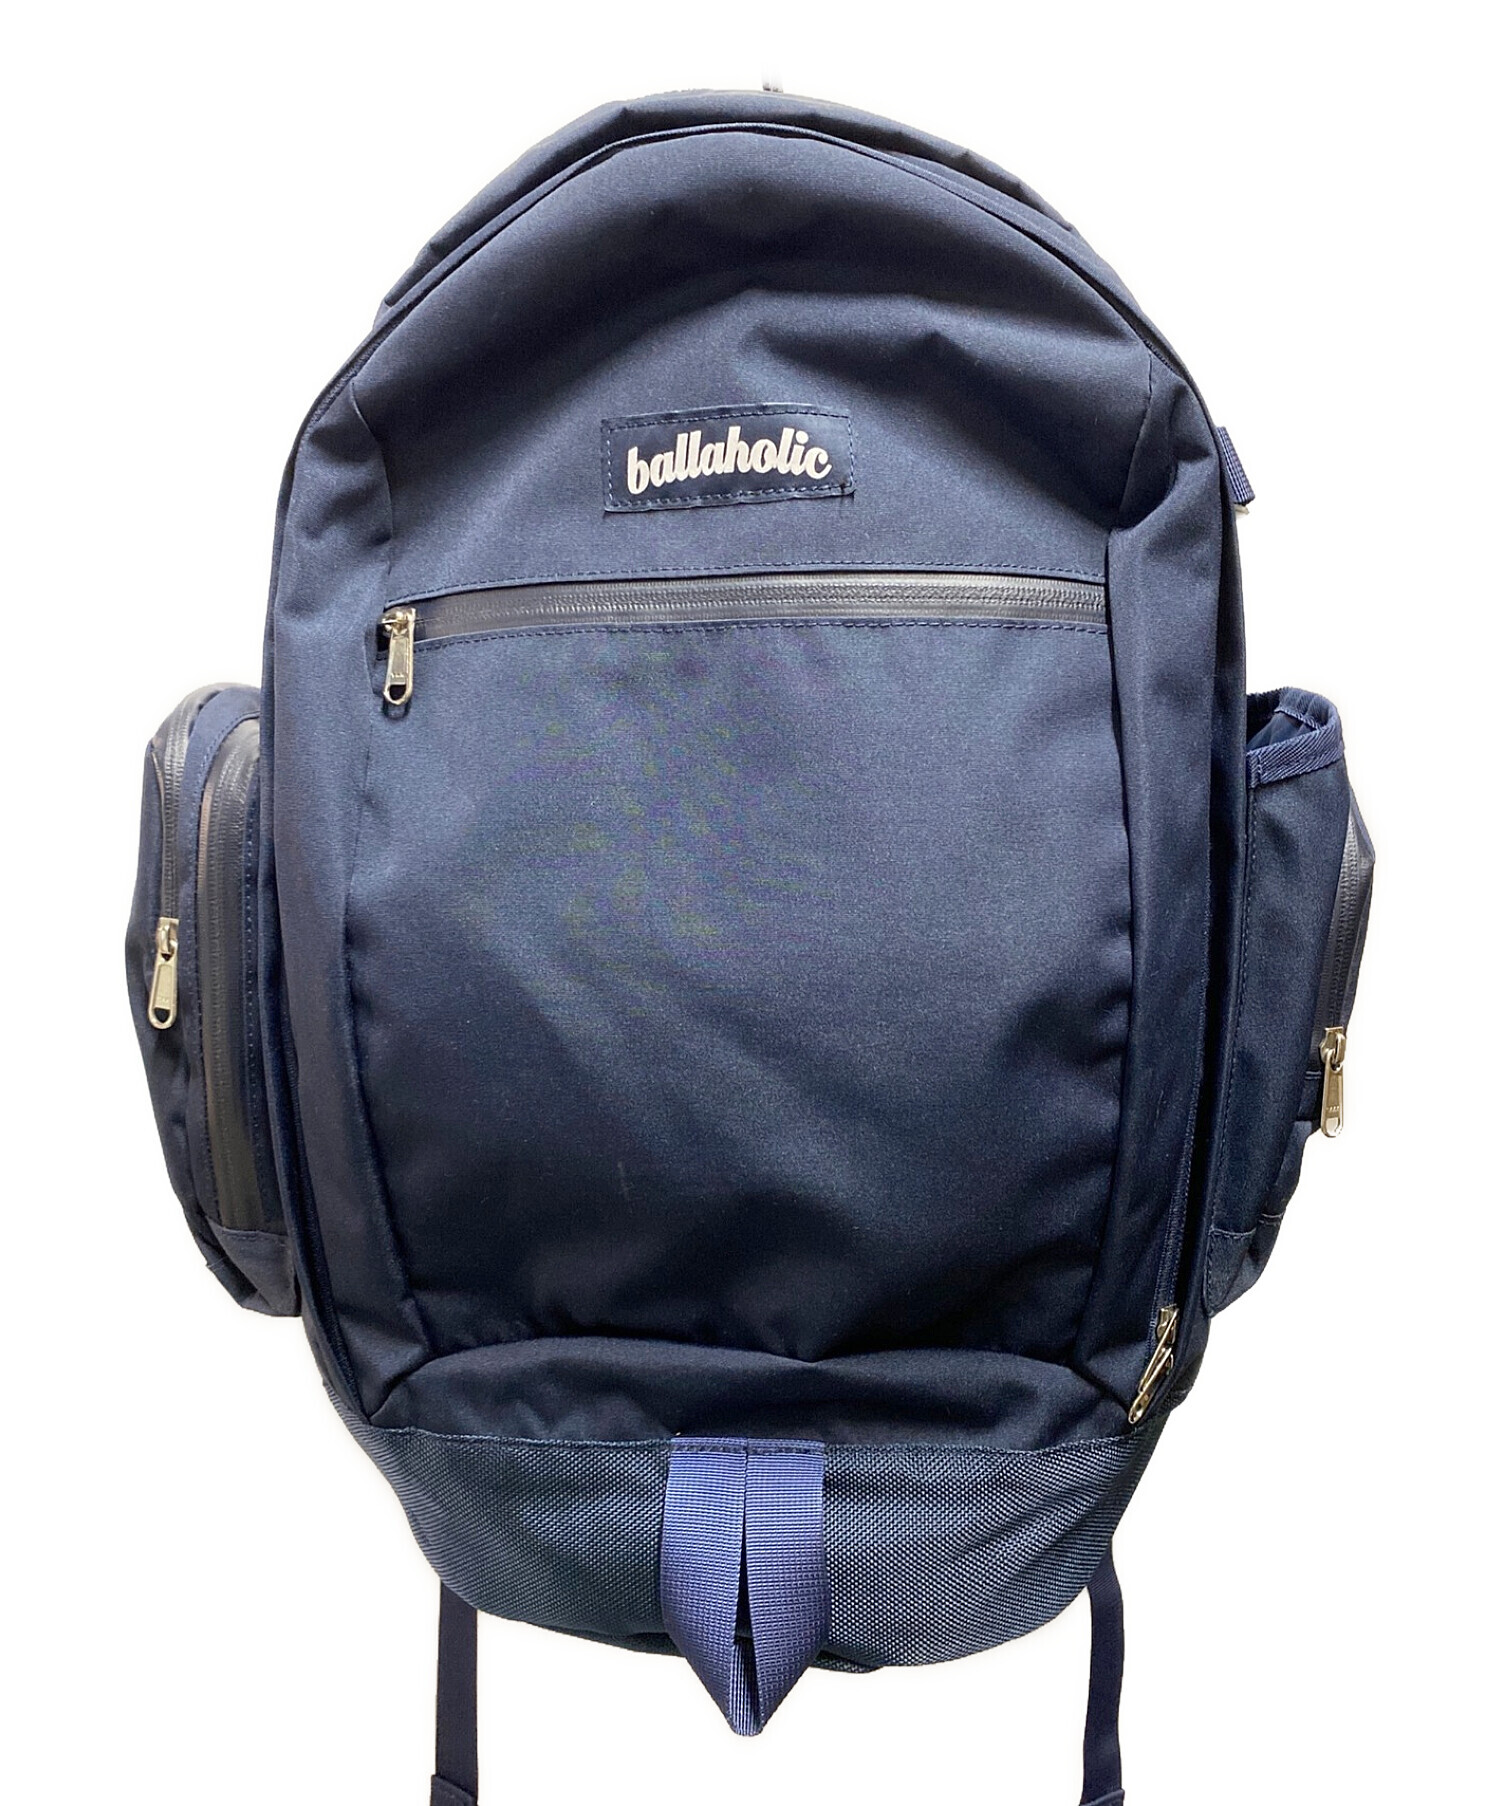 Ball On Journey Backpack    ボーラホリック